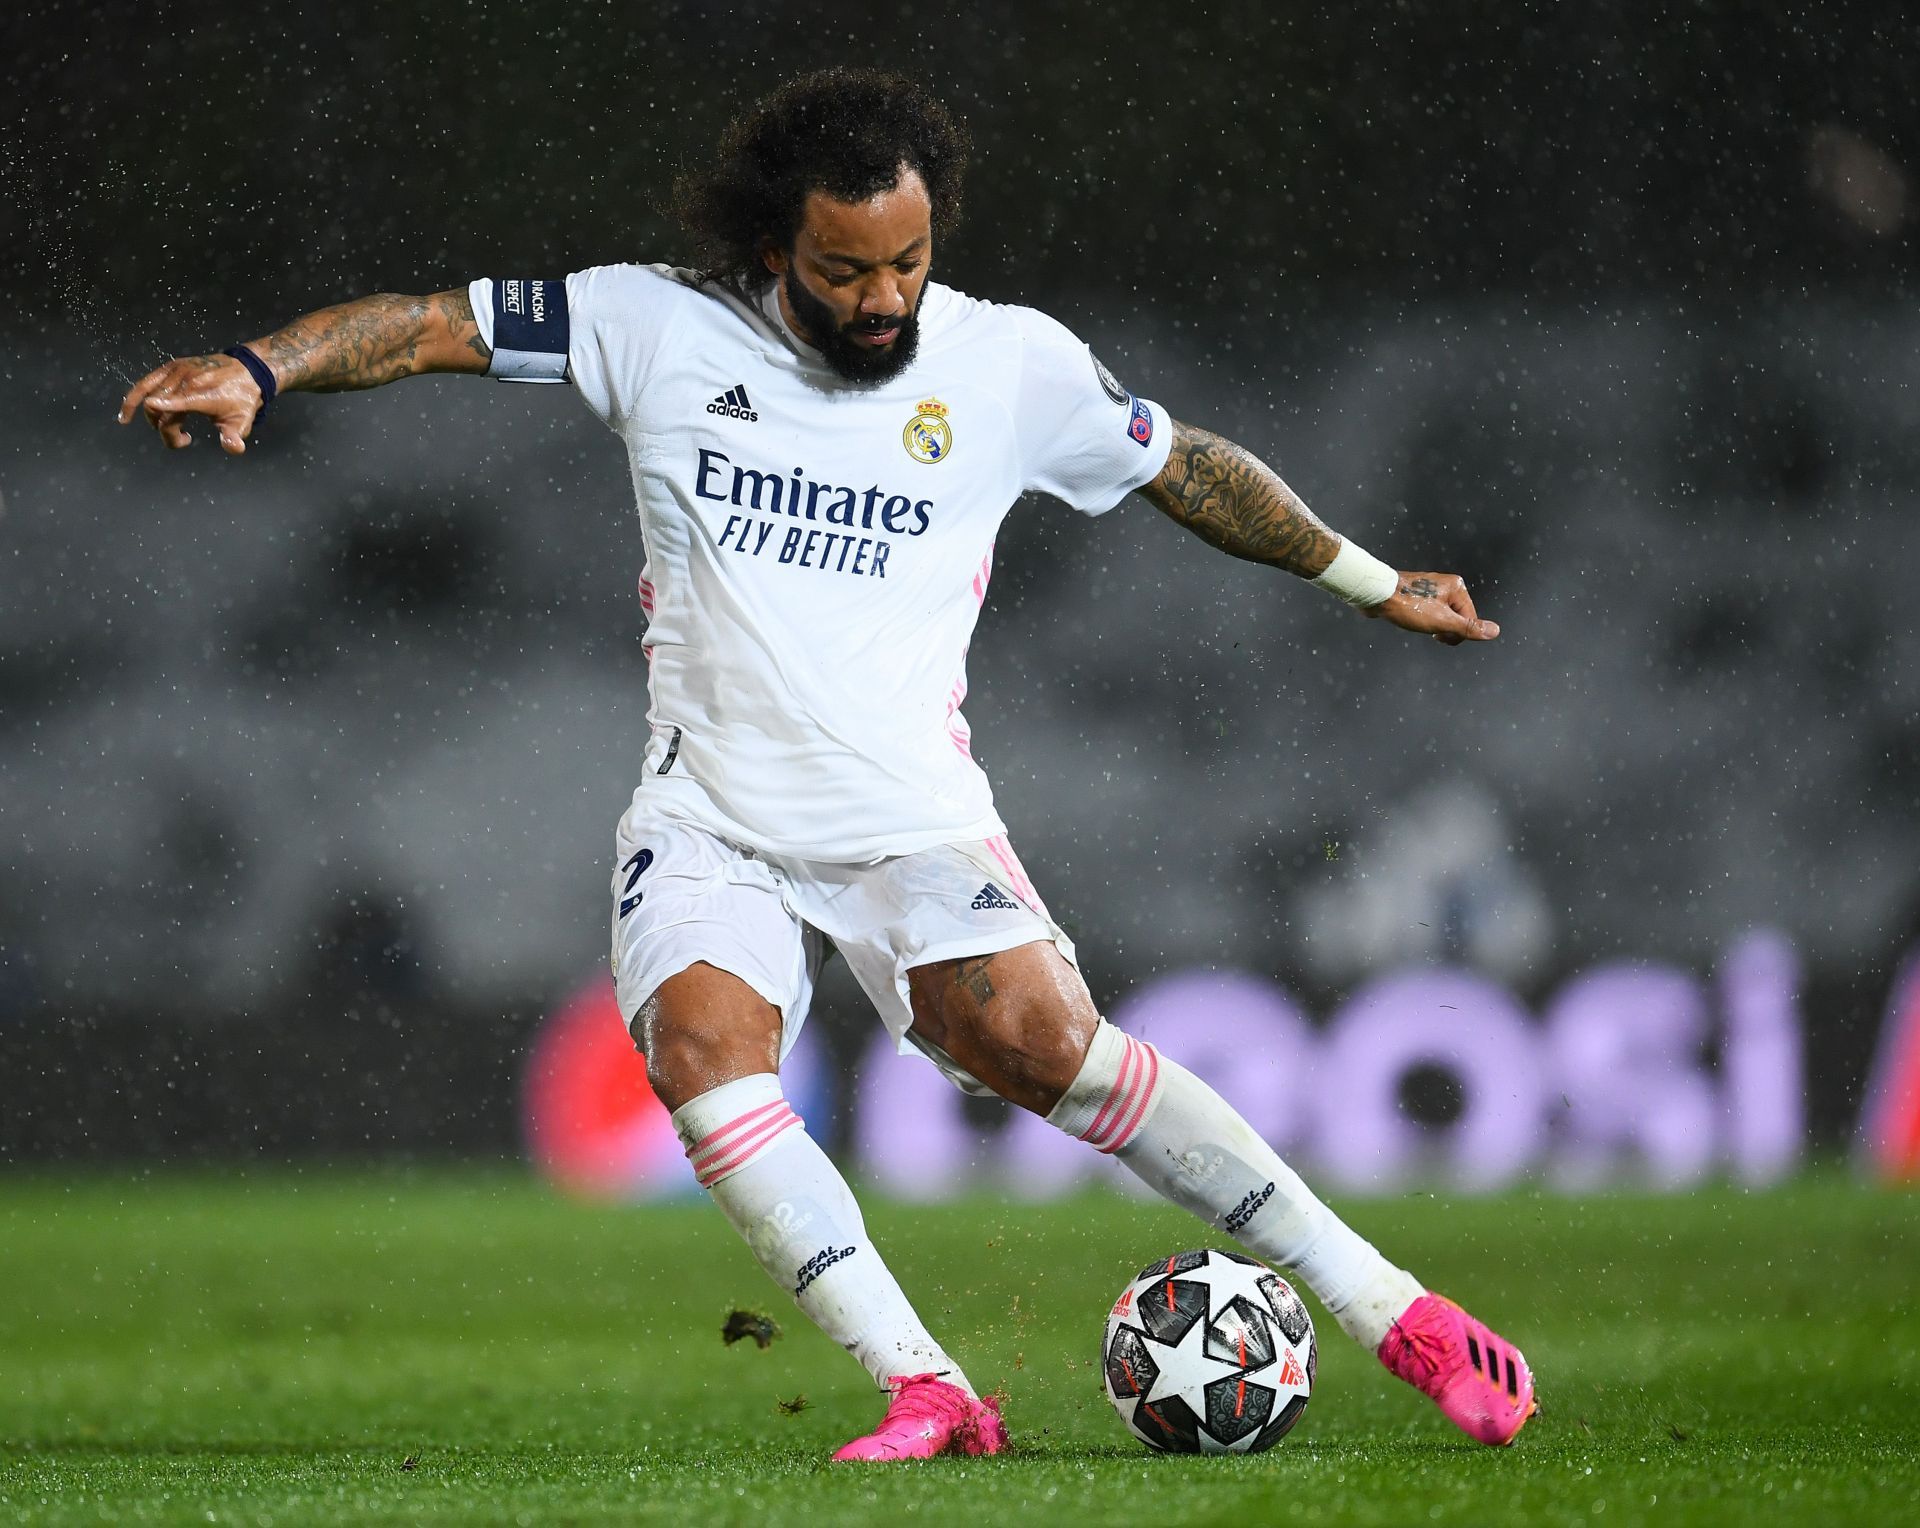 Marcelo is a four-time Champions League winner.